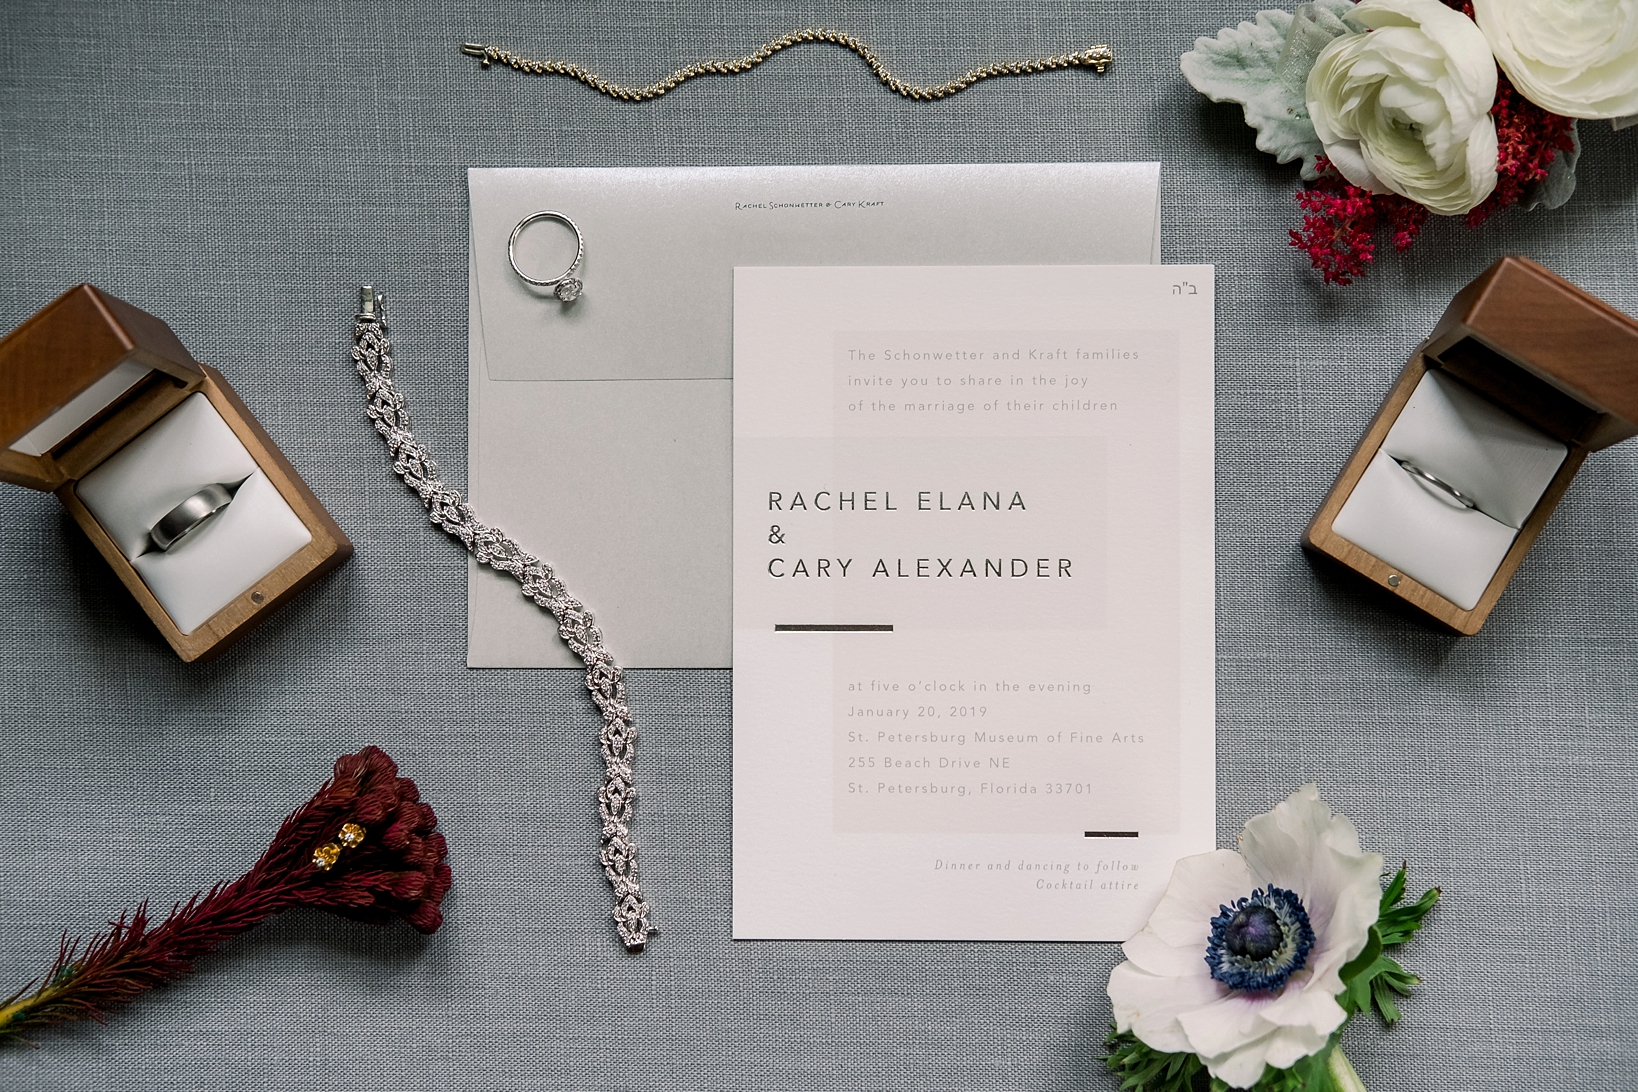 Invitation lay flat with bride's jewelry and florals